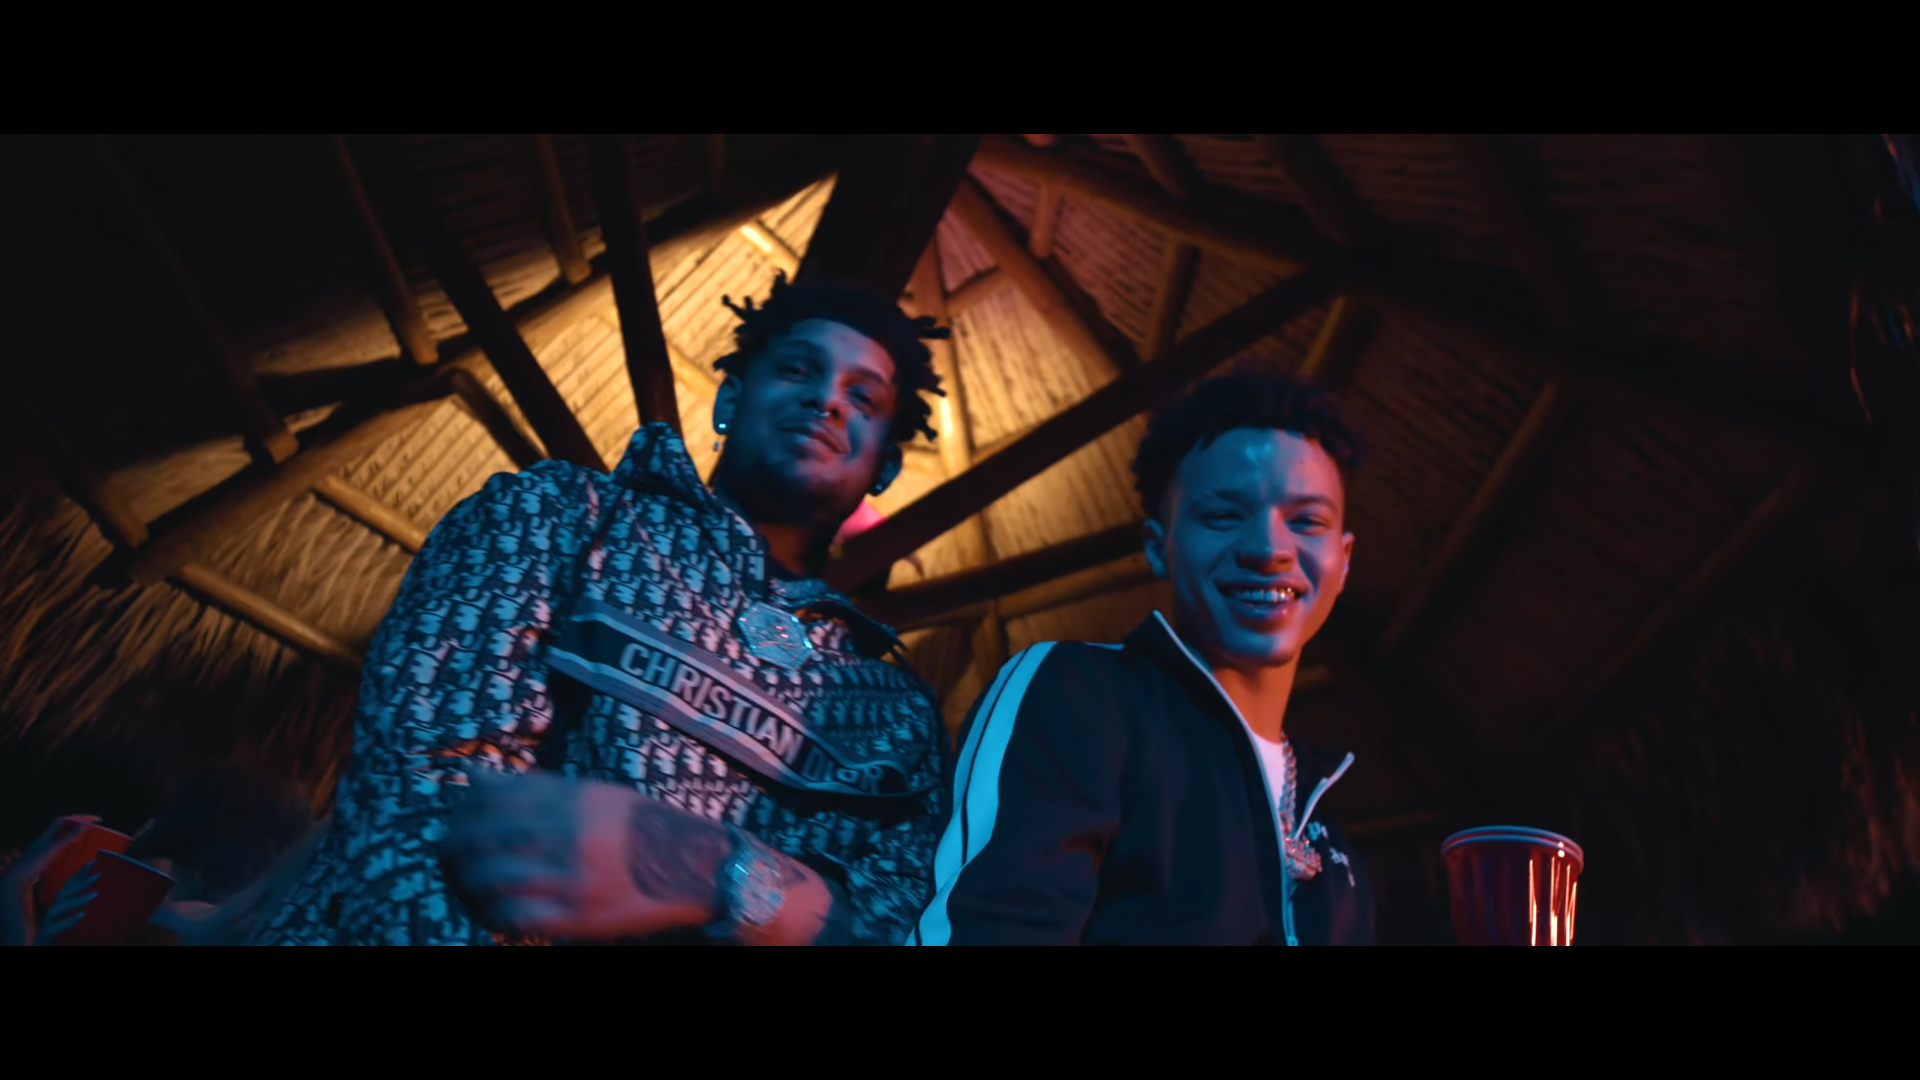 Smokepurpp Drops Video for New Song "We Outside" f/ Lil Mosey